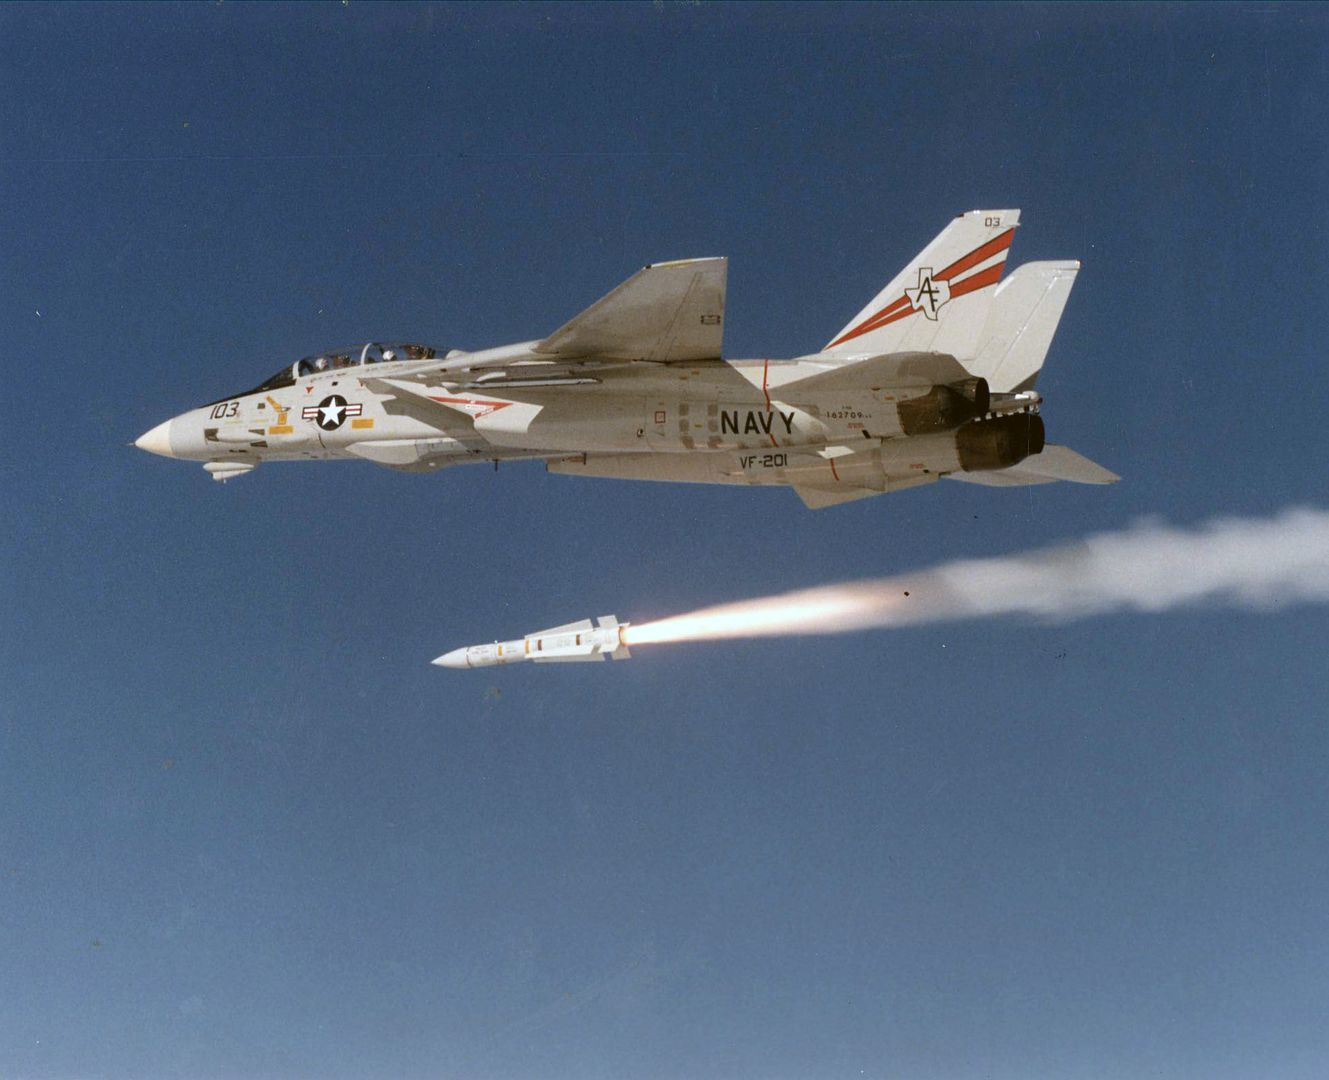 http://i262.photobucket.com/albums/ii120/Duggy009/AandA/F-14A%20Tomcat%20of%20Fighter%20Squadron%20VF%20201%20fires%20an%20AIM-54%20Phoenix.%20This%20marked%20the%20first%20warhead%20shot%20by%20a%20Naval%20Reserve%20squadron..jpg